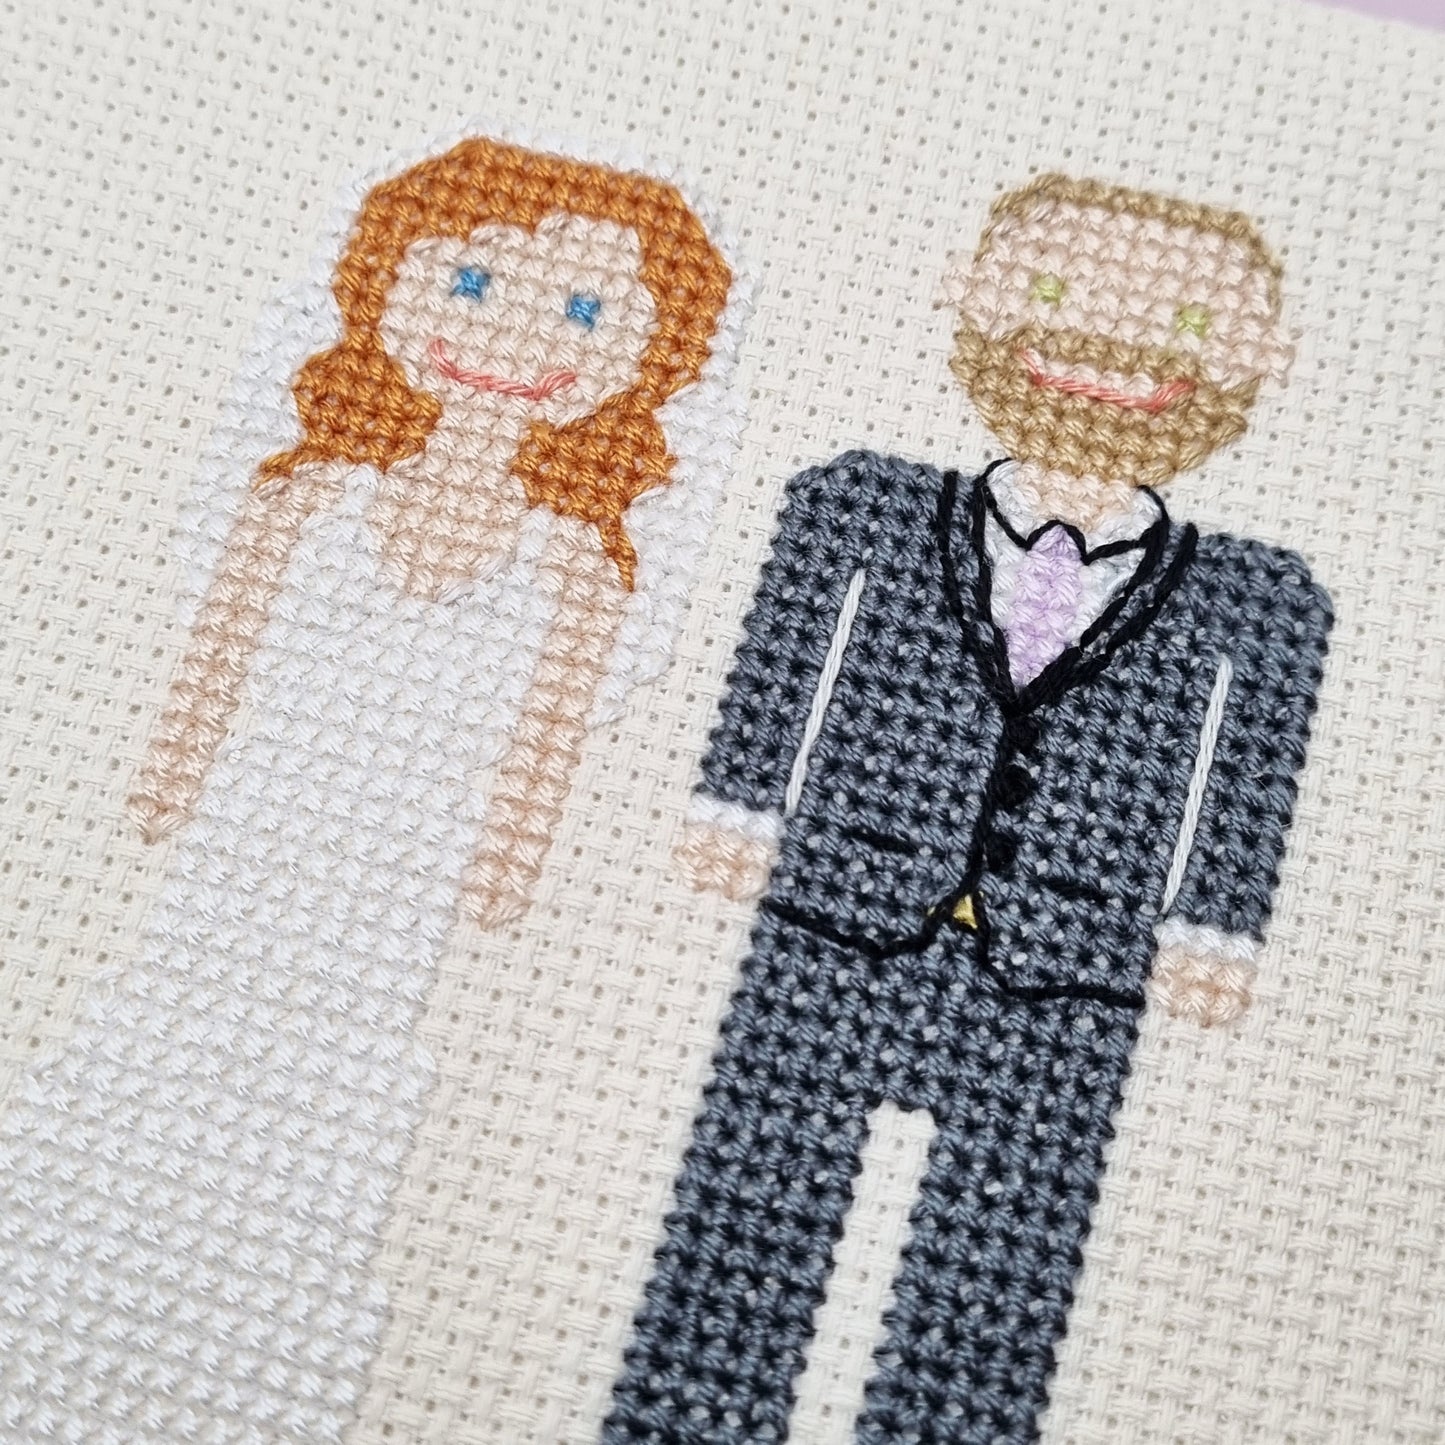 Melocharacters: The Wedding Edition Cross Stitch Pattern